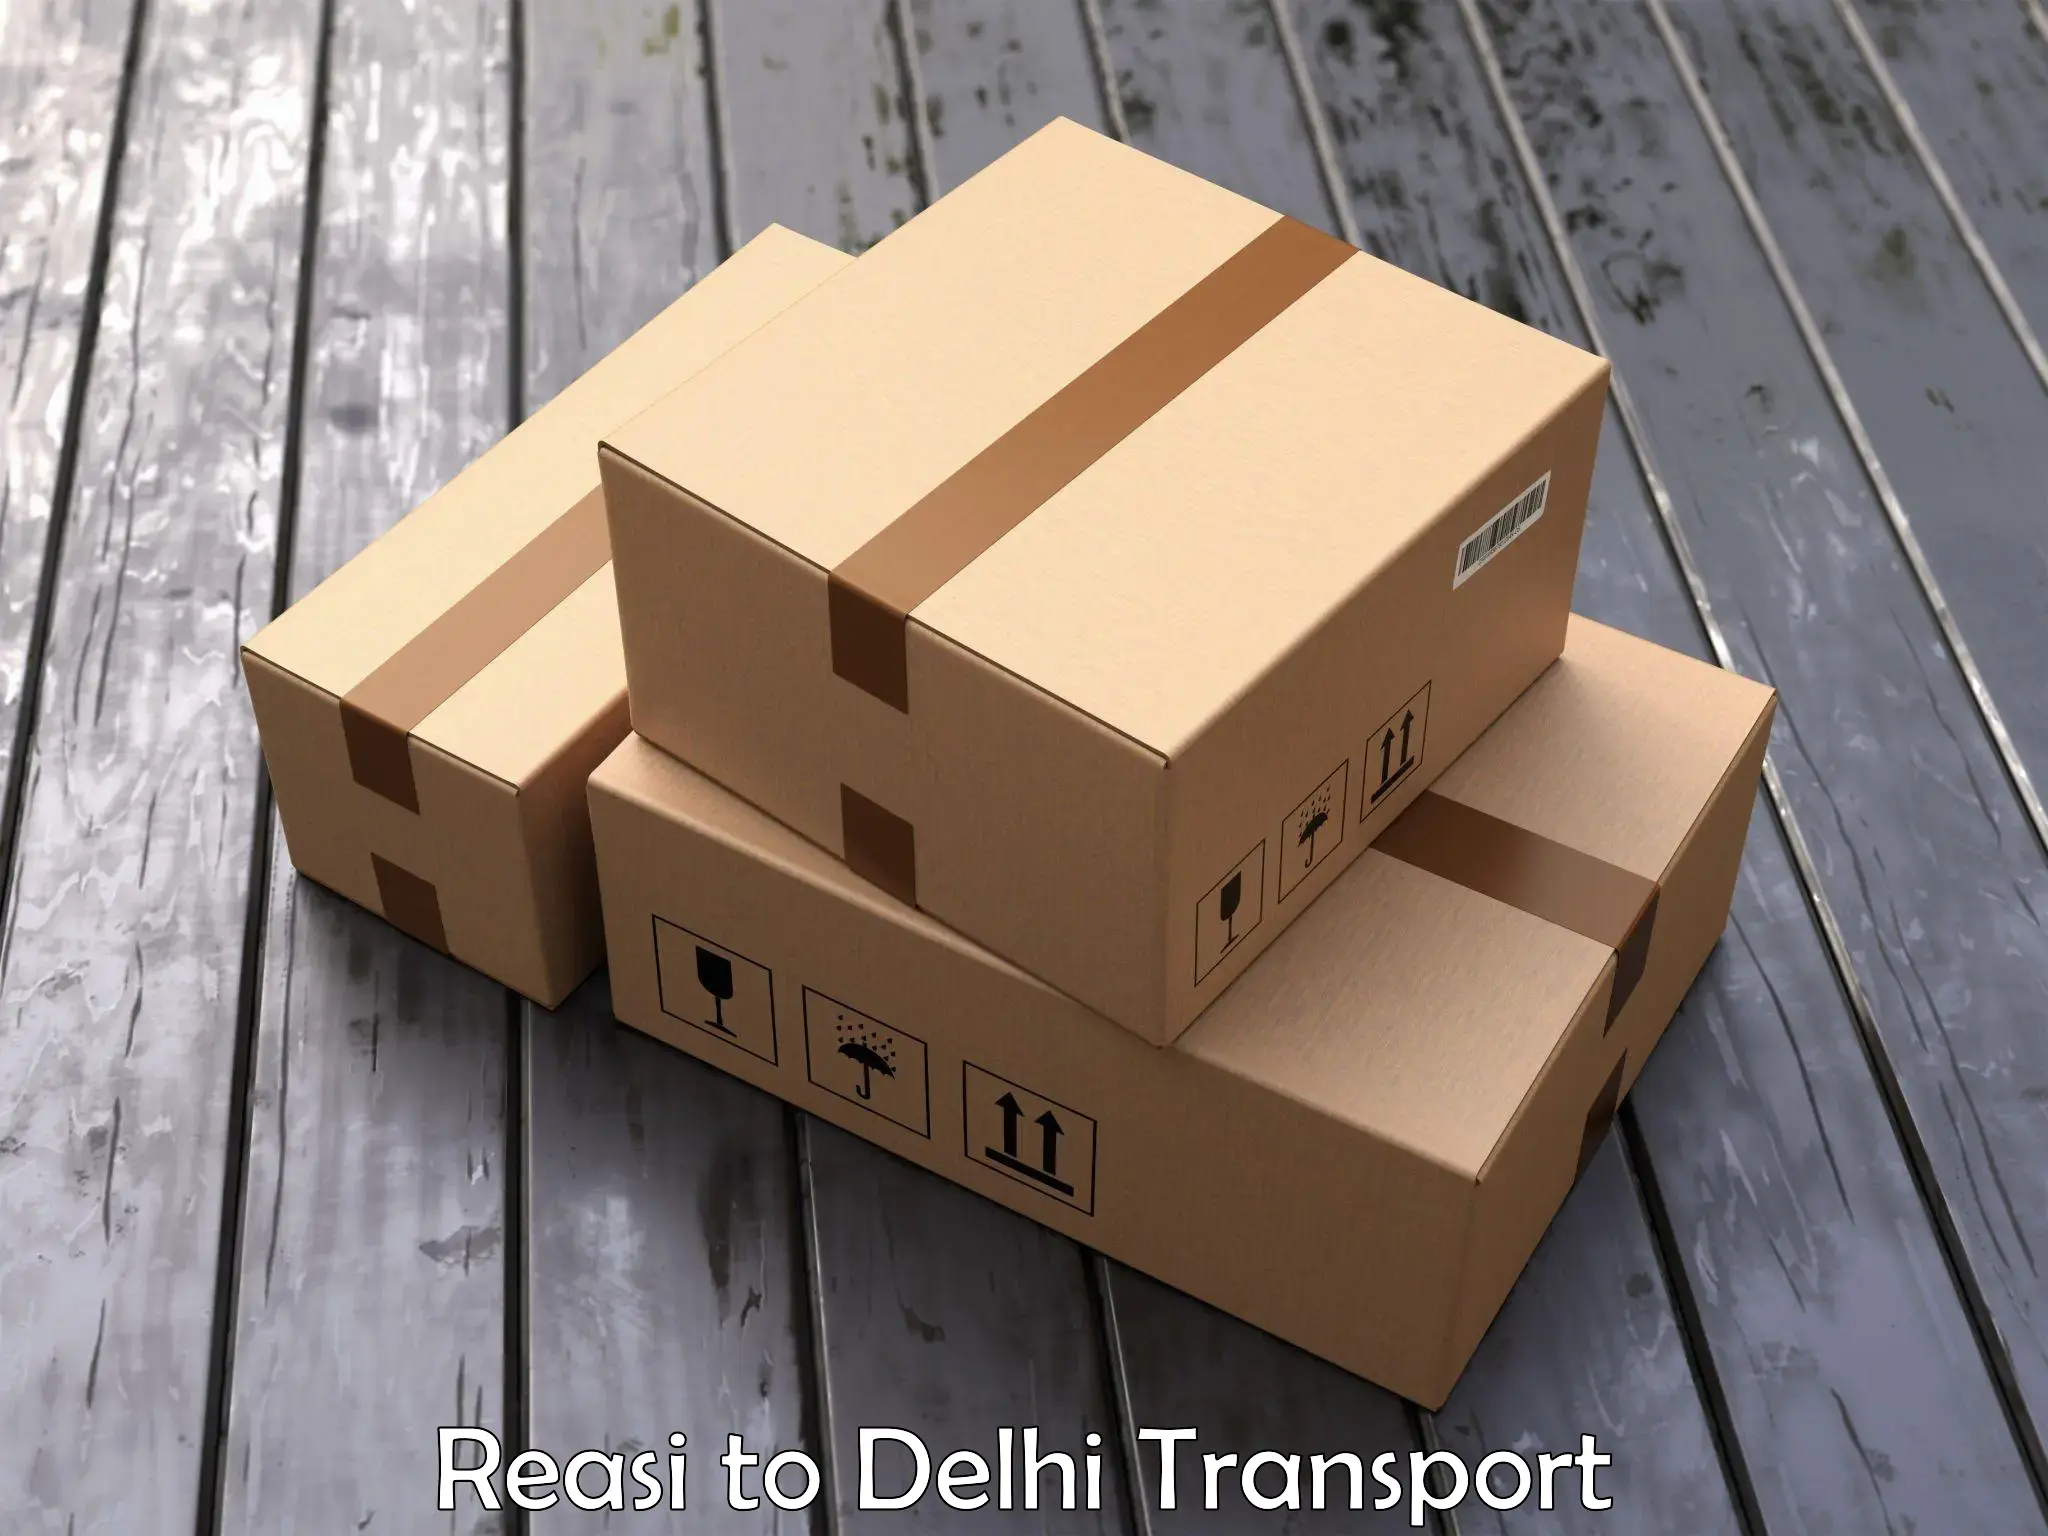 Goods delivery service Reasi to Delhi Technological University DTU